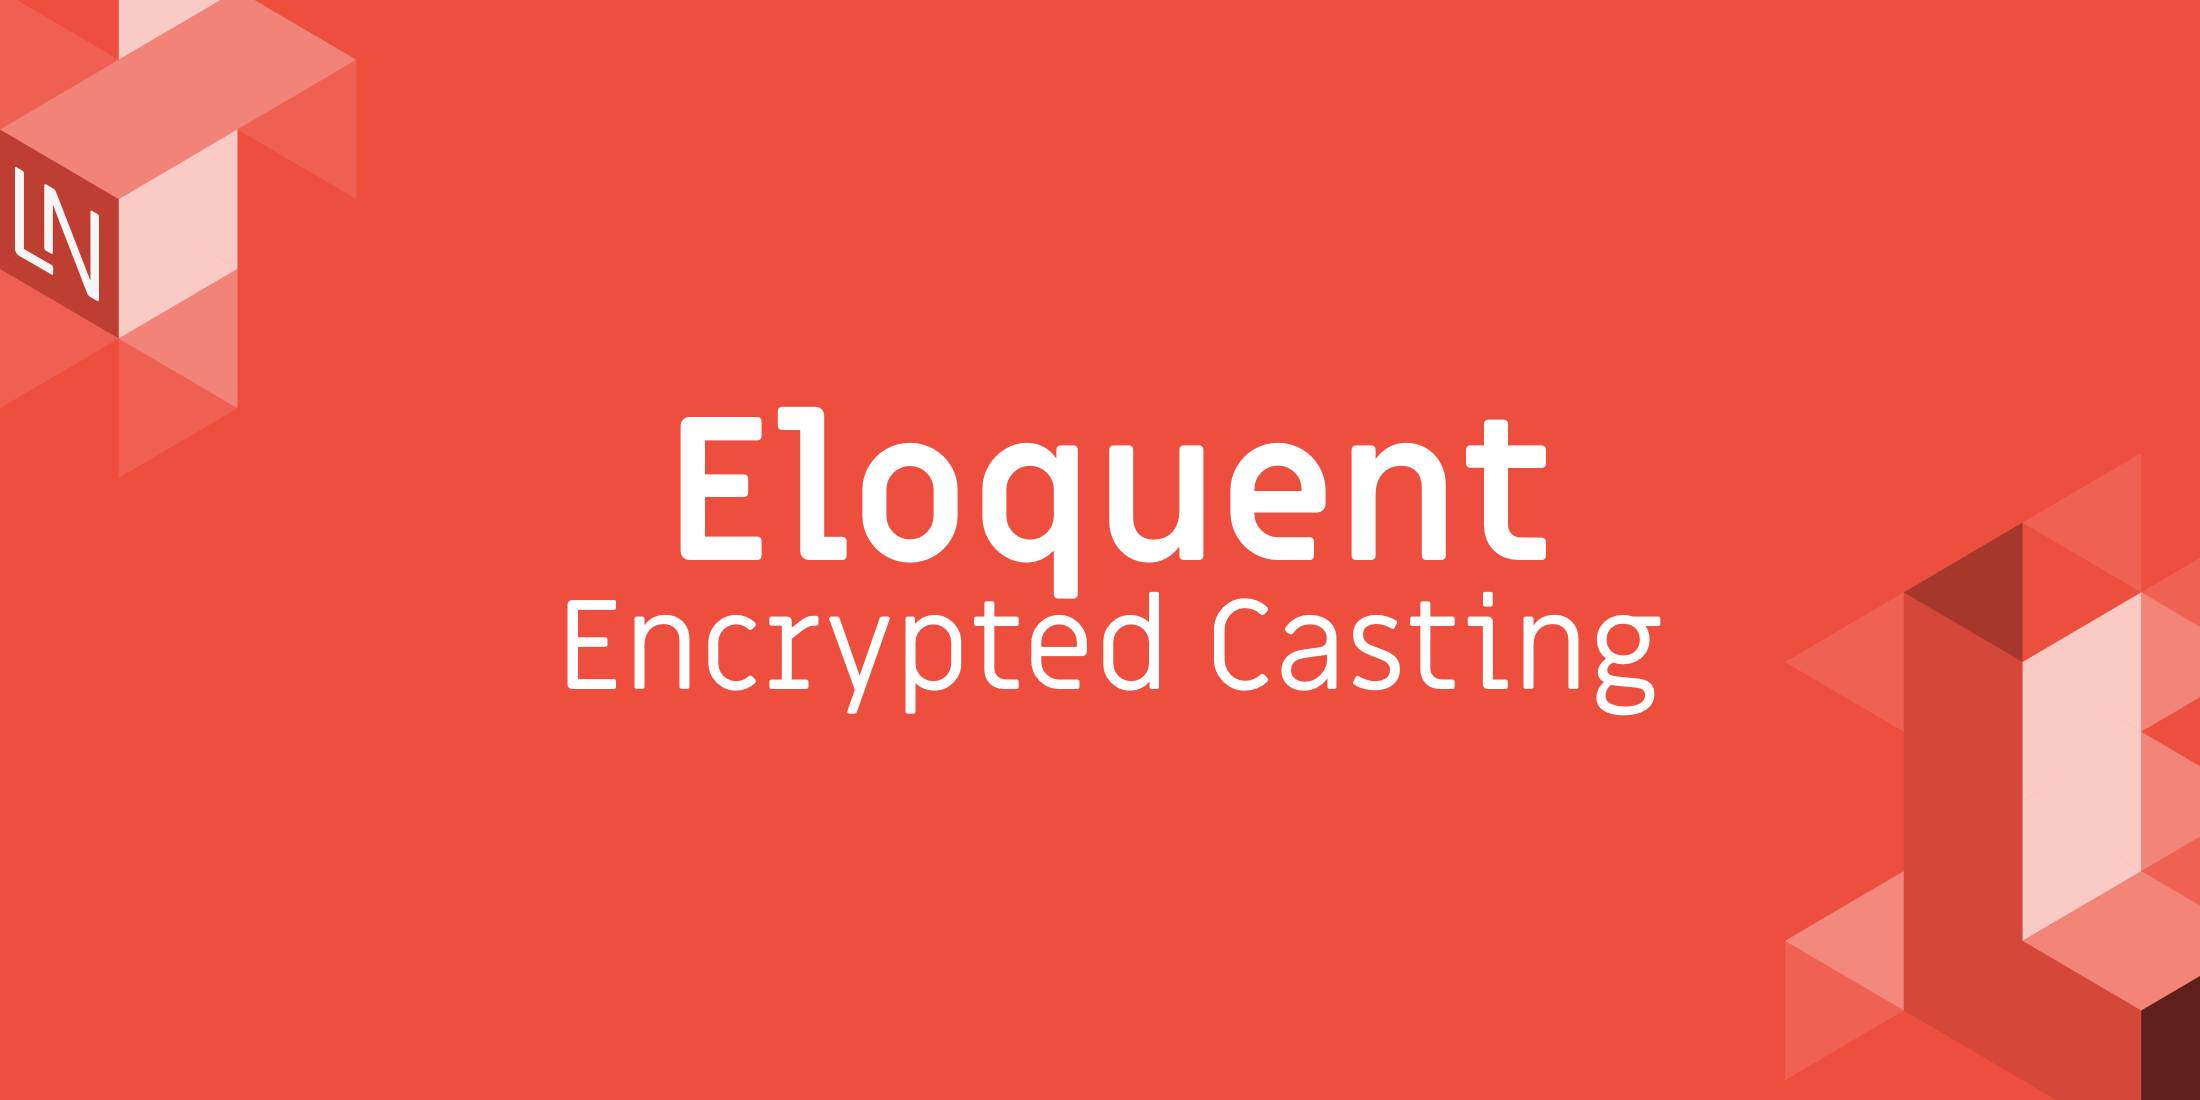 Eloquent Encrypted Casting image